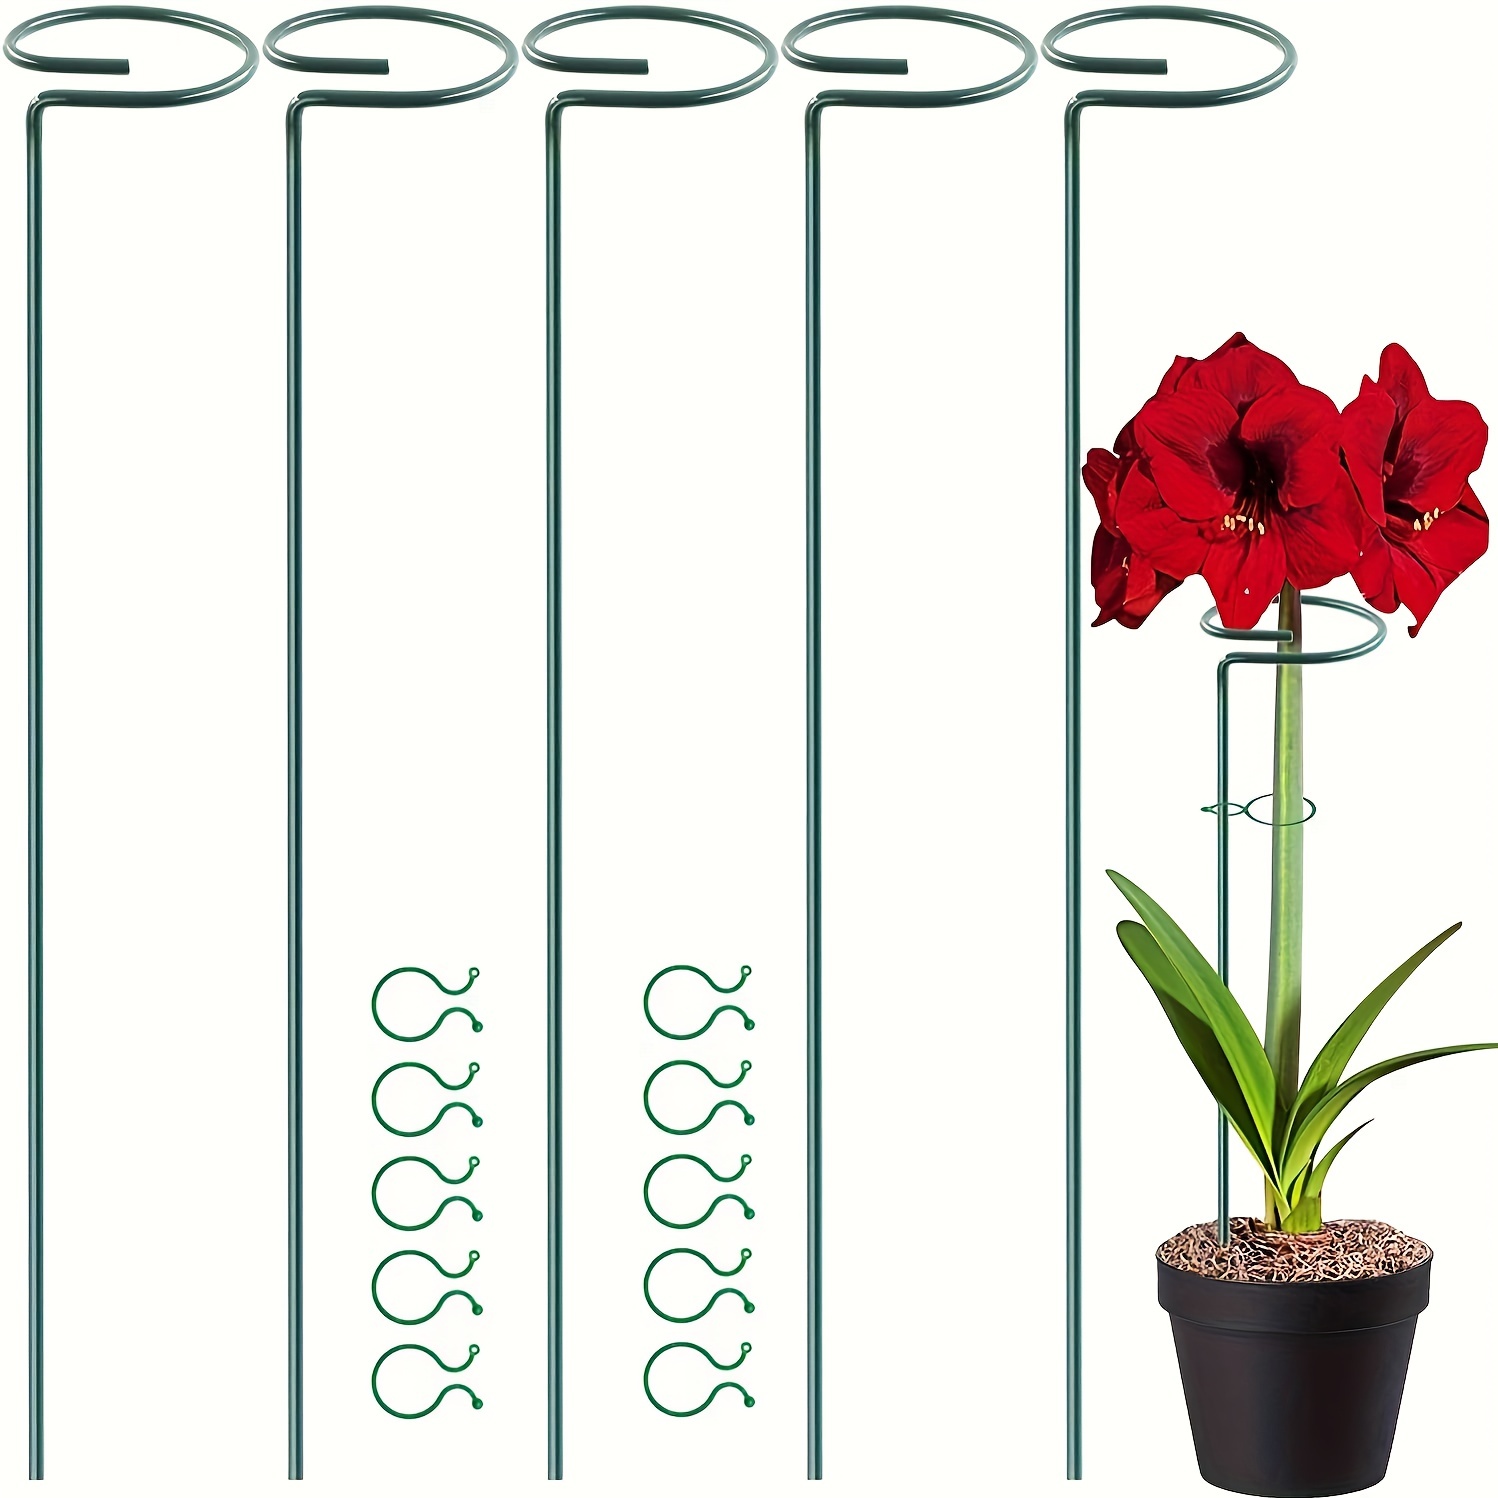 

5pcs, Plant Support Stakes, Garden Single Stem Flower Support Rod Metal, Plant Cage Support Ring, With 10 Plant Clips, Suitable For Orchids, Lilies, Peonies, Roses And Stems